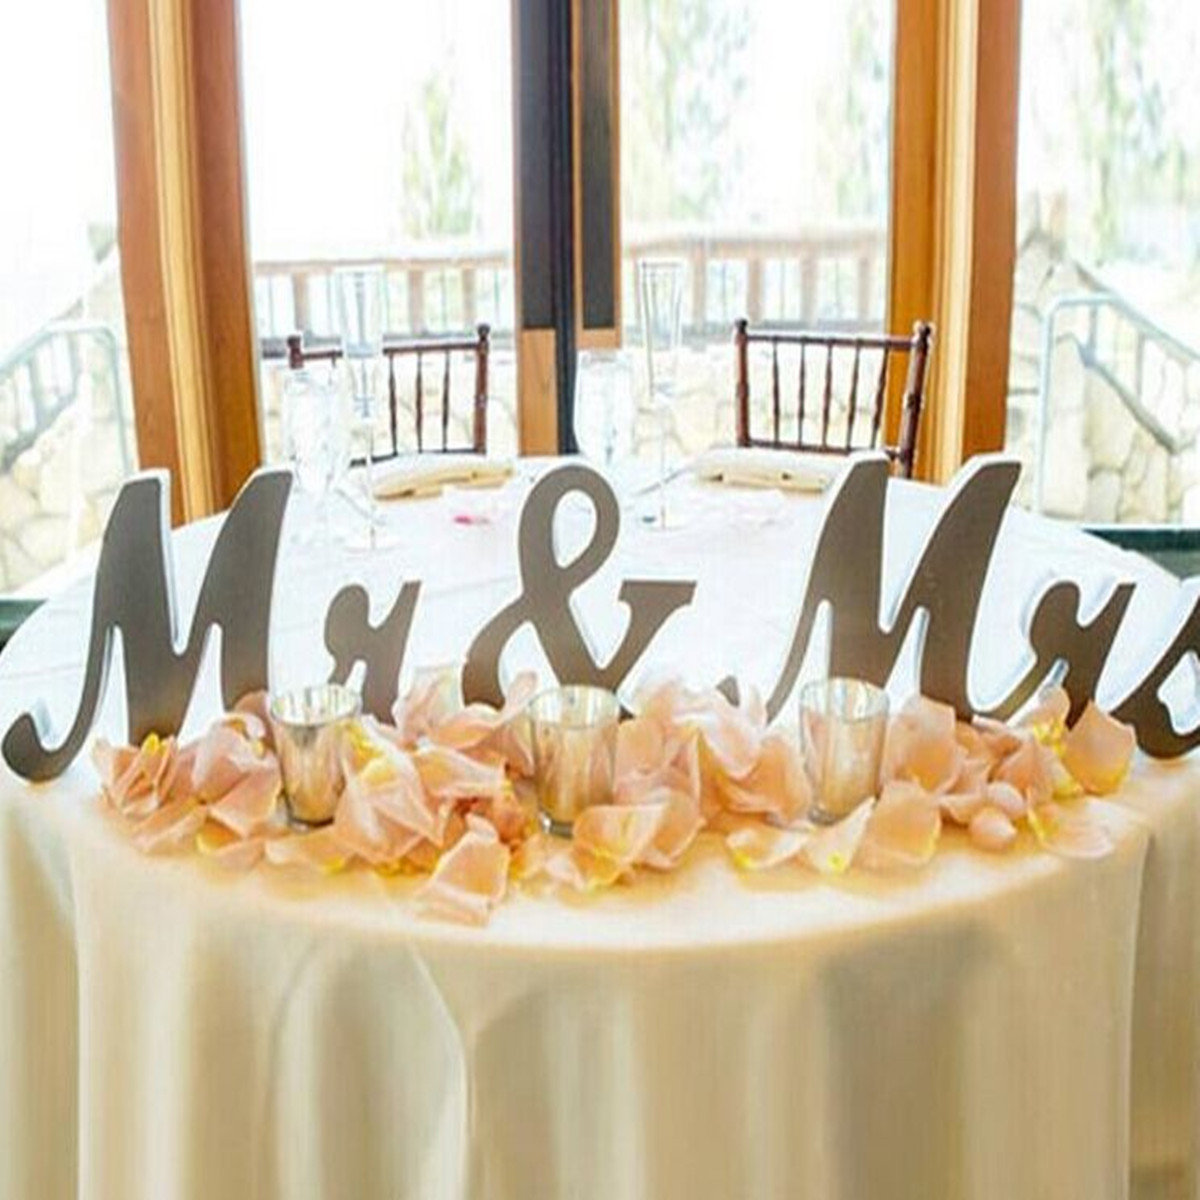 

35CM MR&MRS Shining Bling Wooden Letters Sign Table Decoration Wedding Favor Gift Accessories